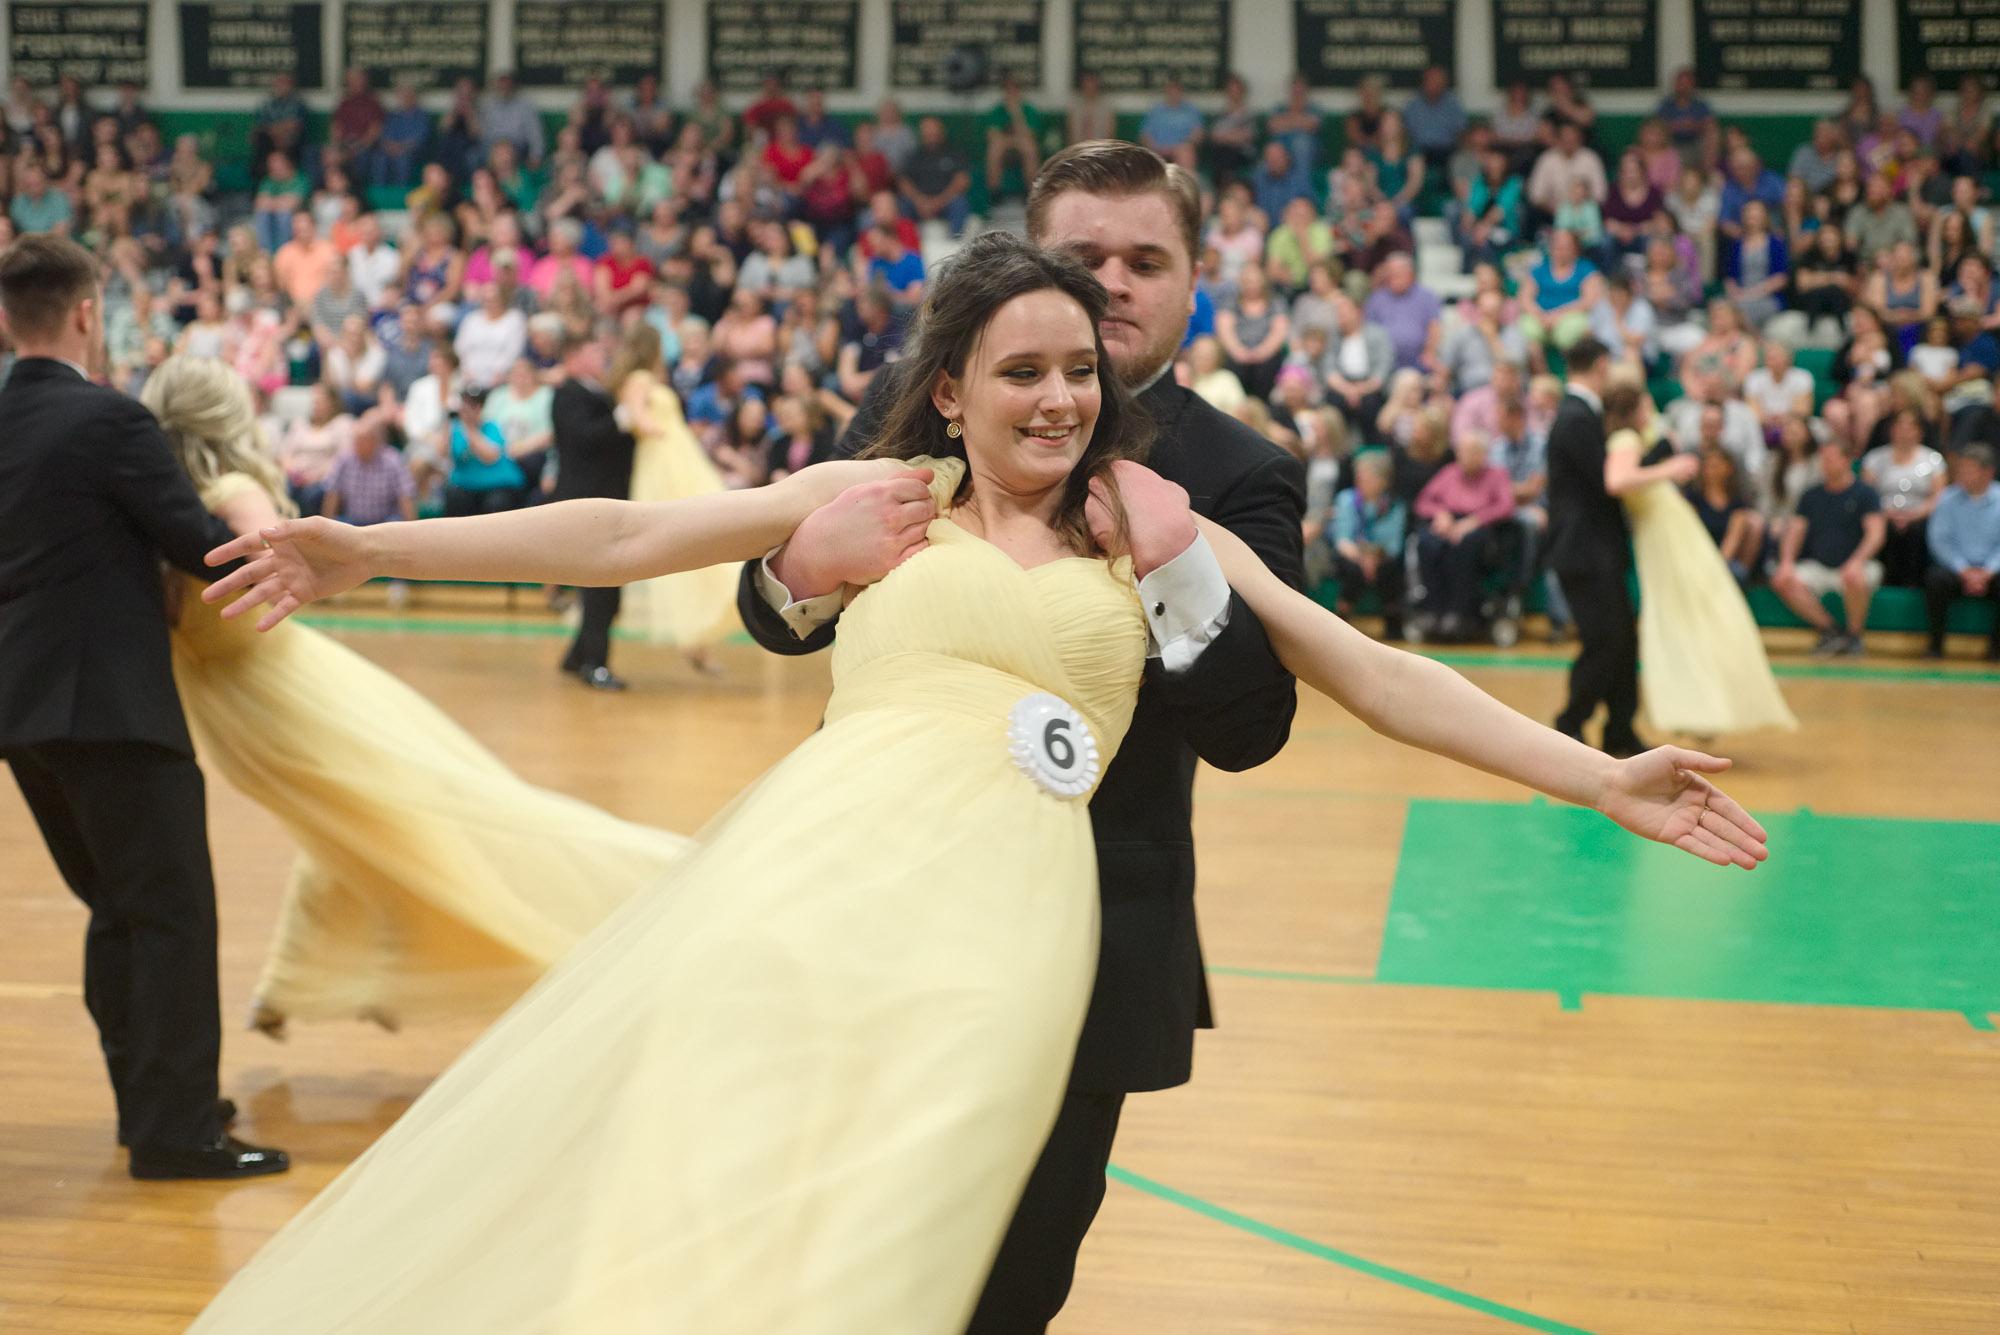 Farewell, With Elegance - Alyssa and Ethan dance during the 62nd Apple Blossom...